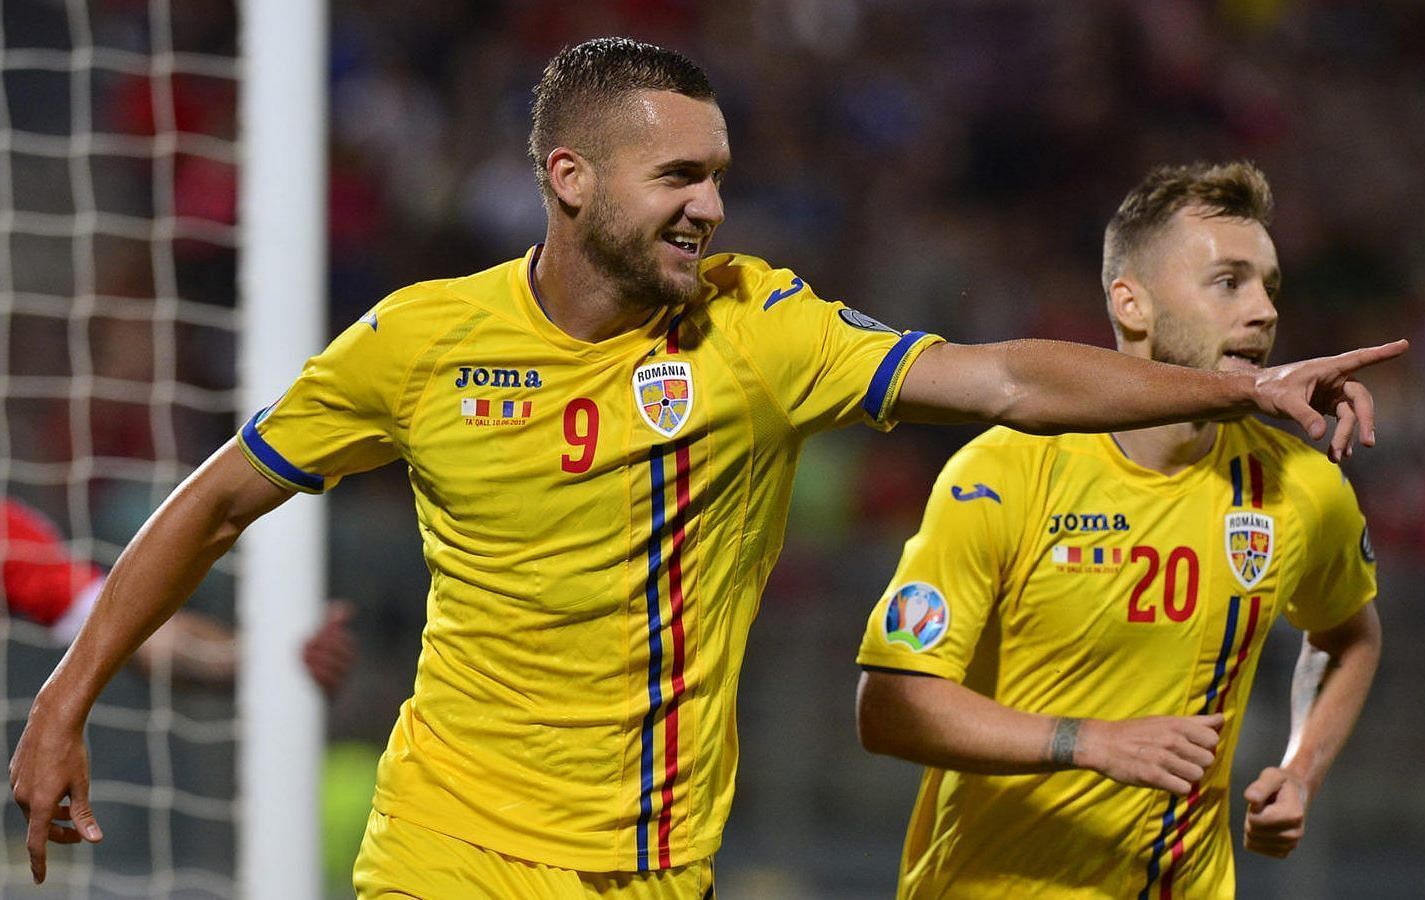 Romania and Belarus had contrasting fortunes in their opening qualifiers